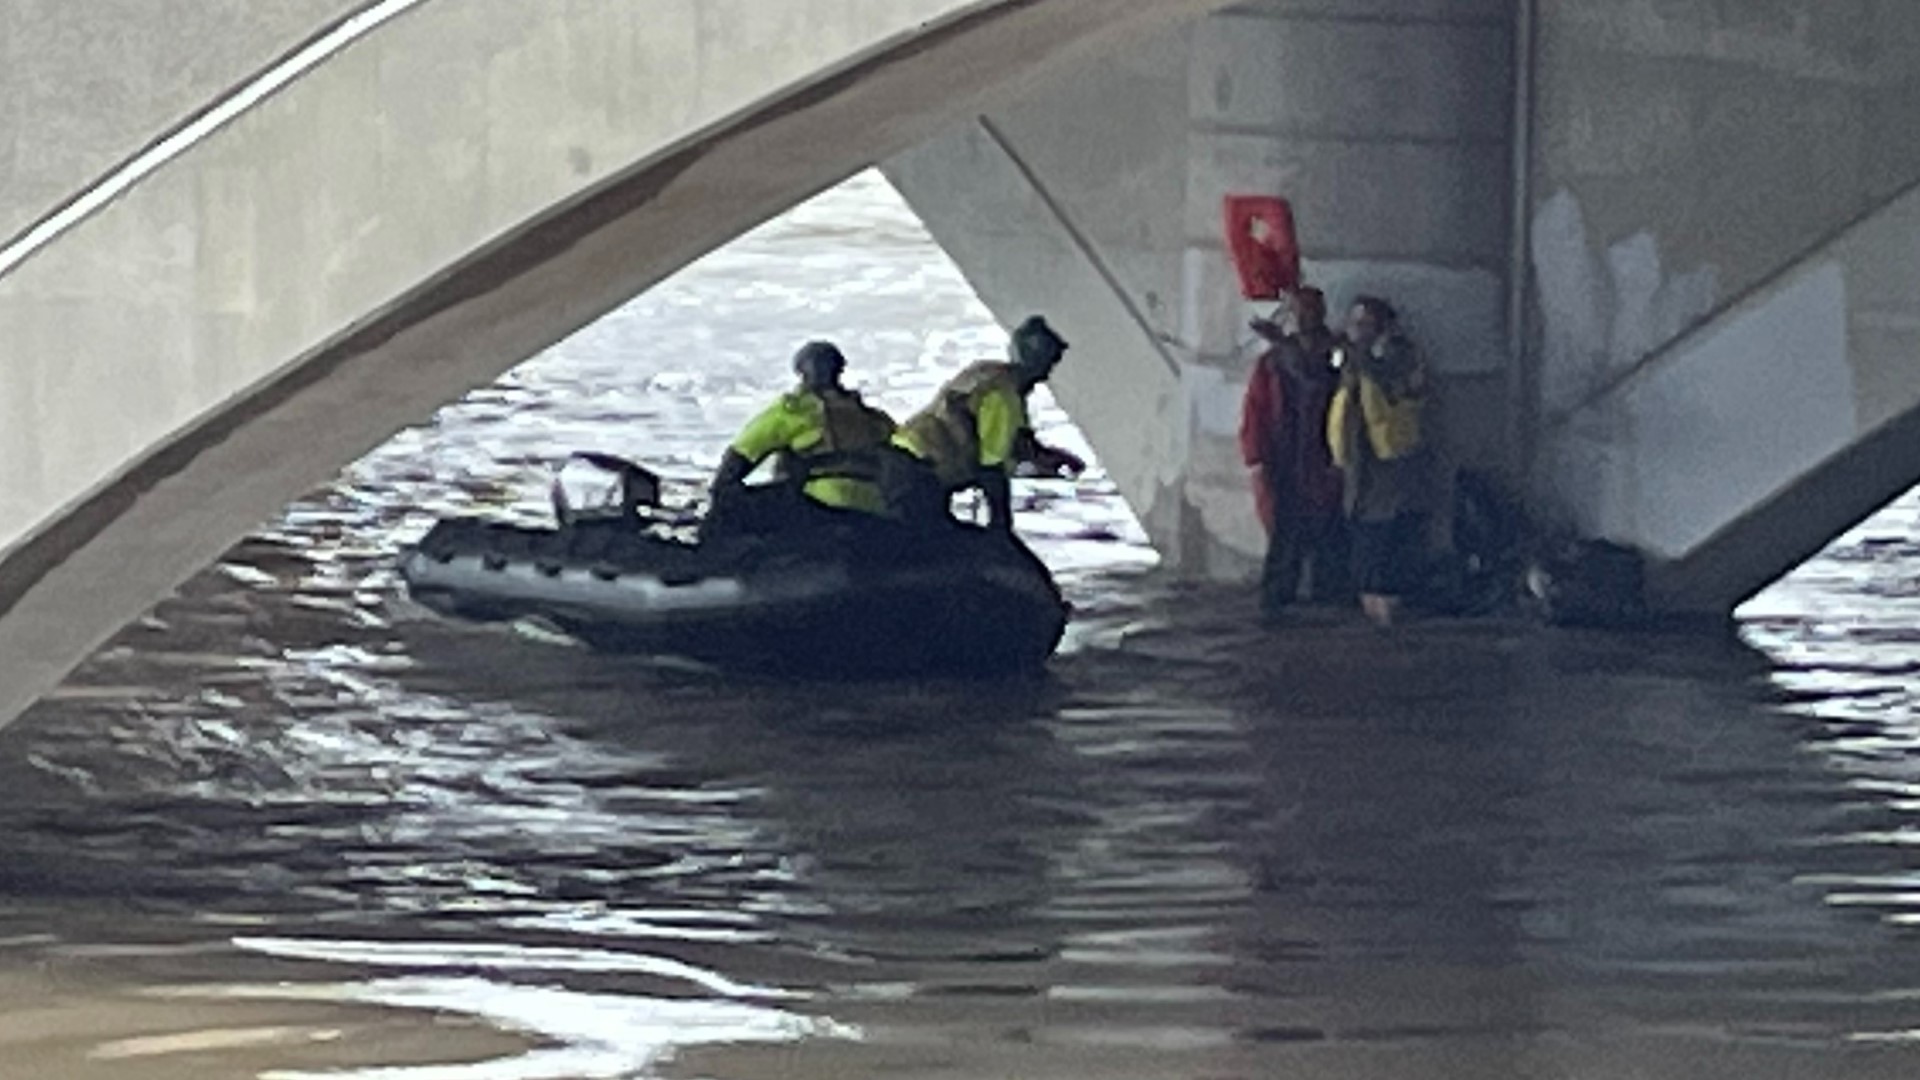 Two people were rescued from under the bridge as water rose at the Scioto River from the heavy rain.